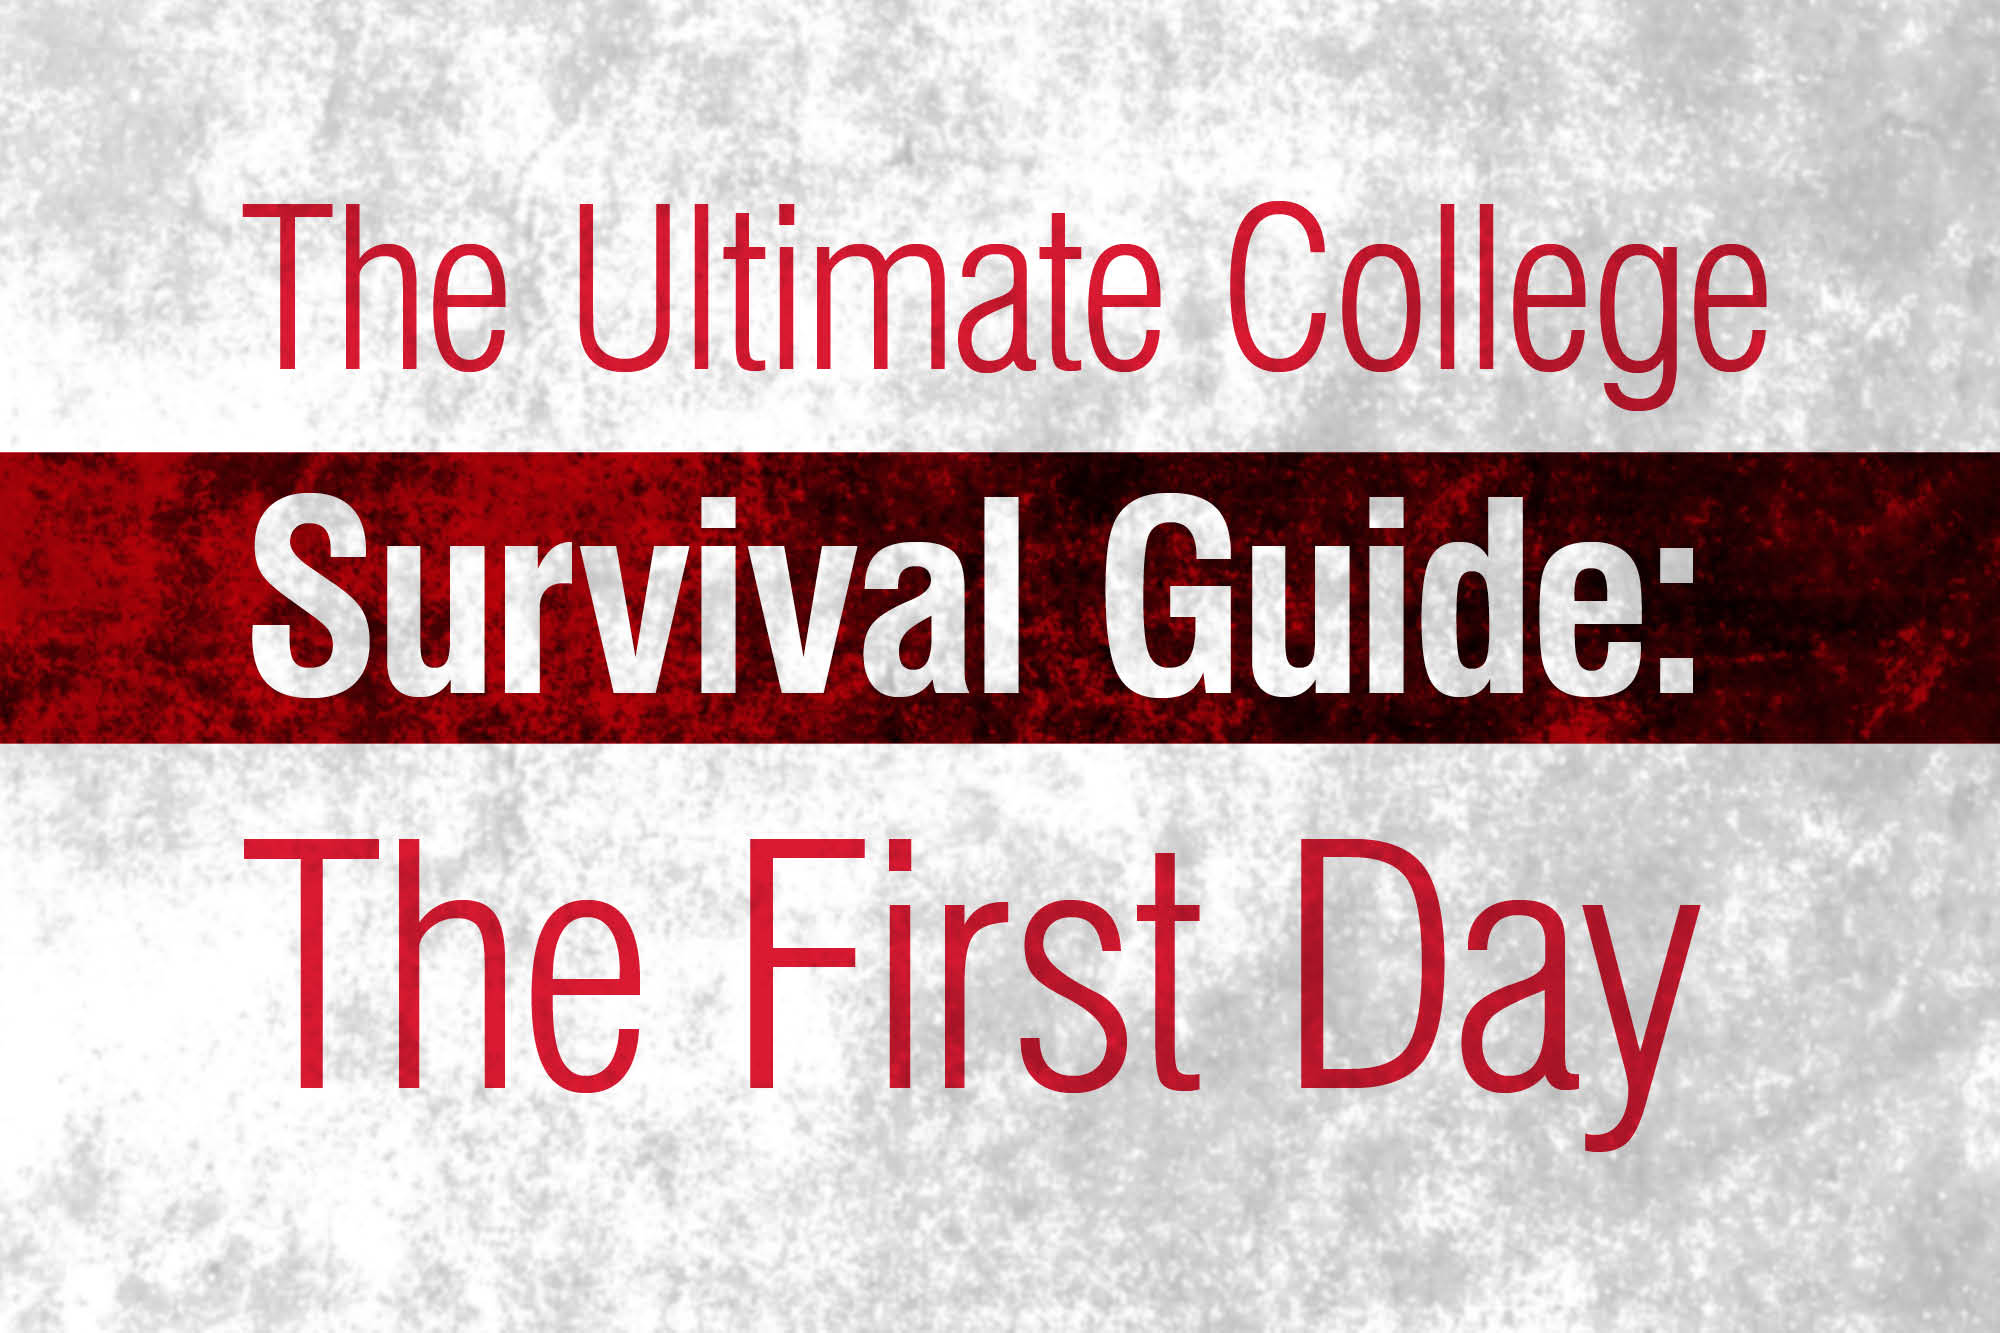 White background with the words "The Ultimate College Survival Guide: The First Day."